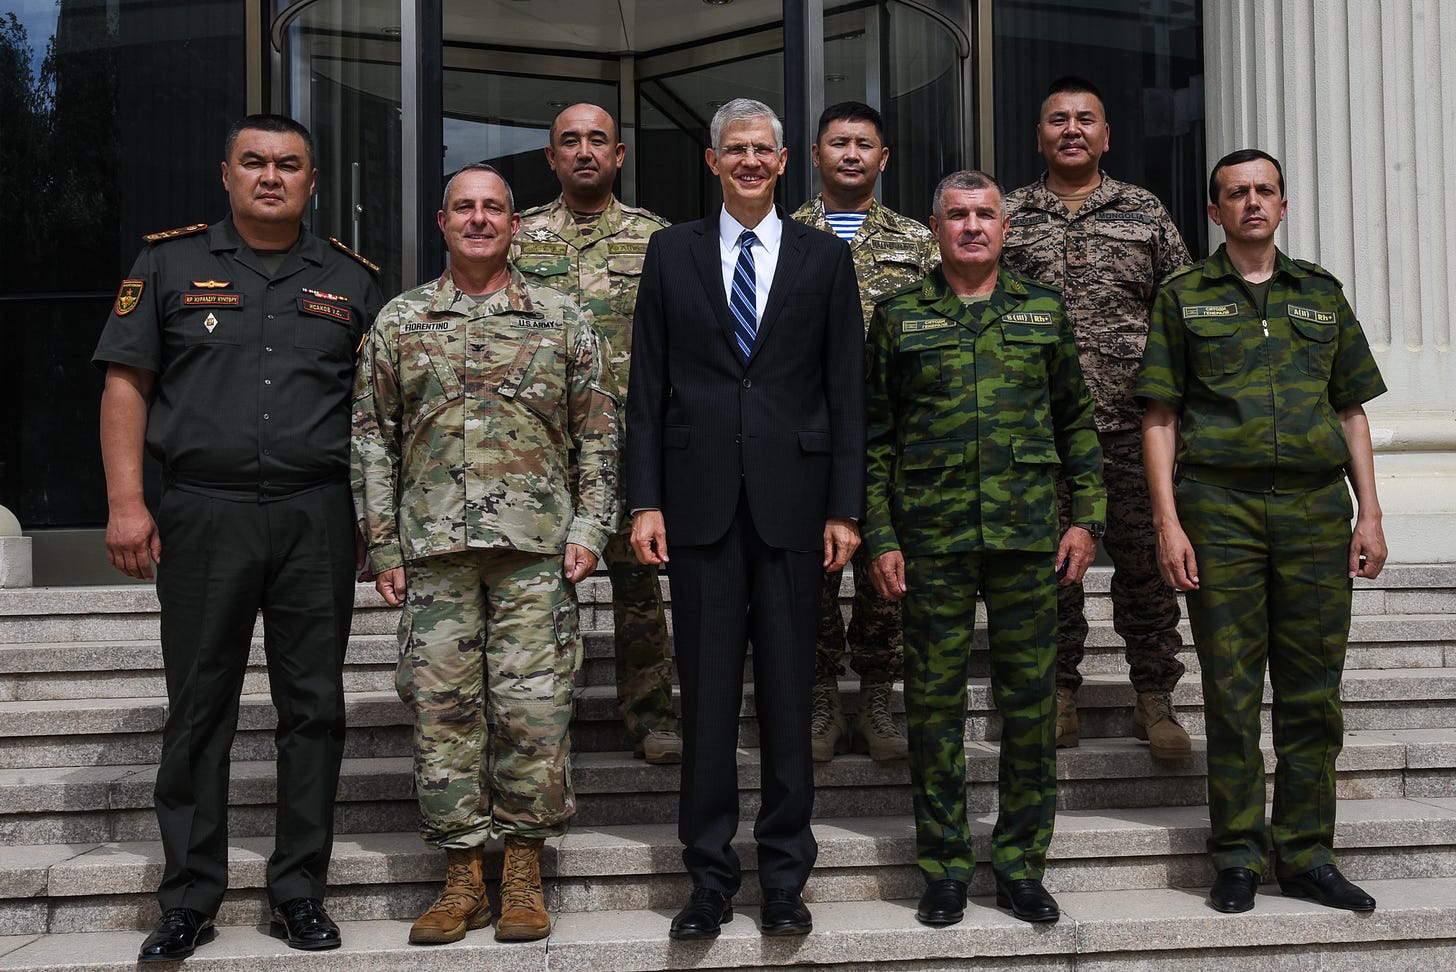 REGIONAL COOPERATION 2022 Military Exercise Begins in Dushanbe > U.S.  Central Command > News Article View